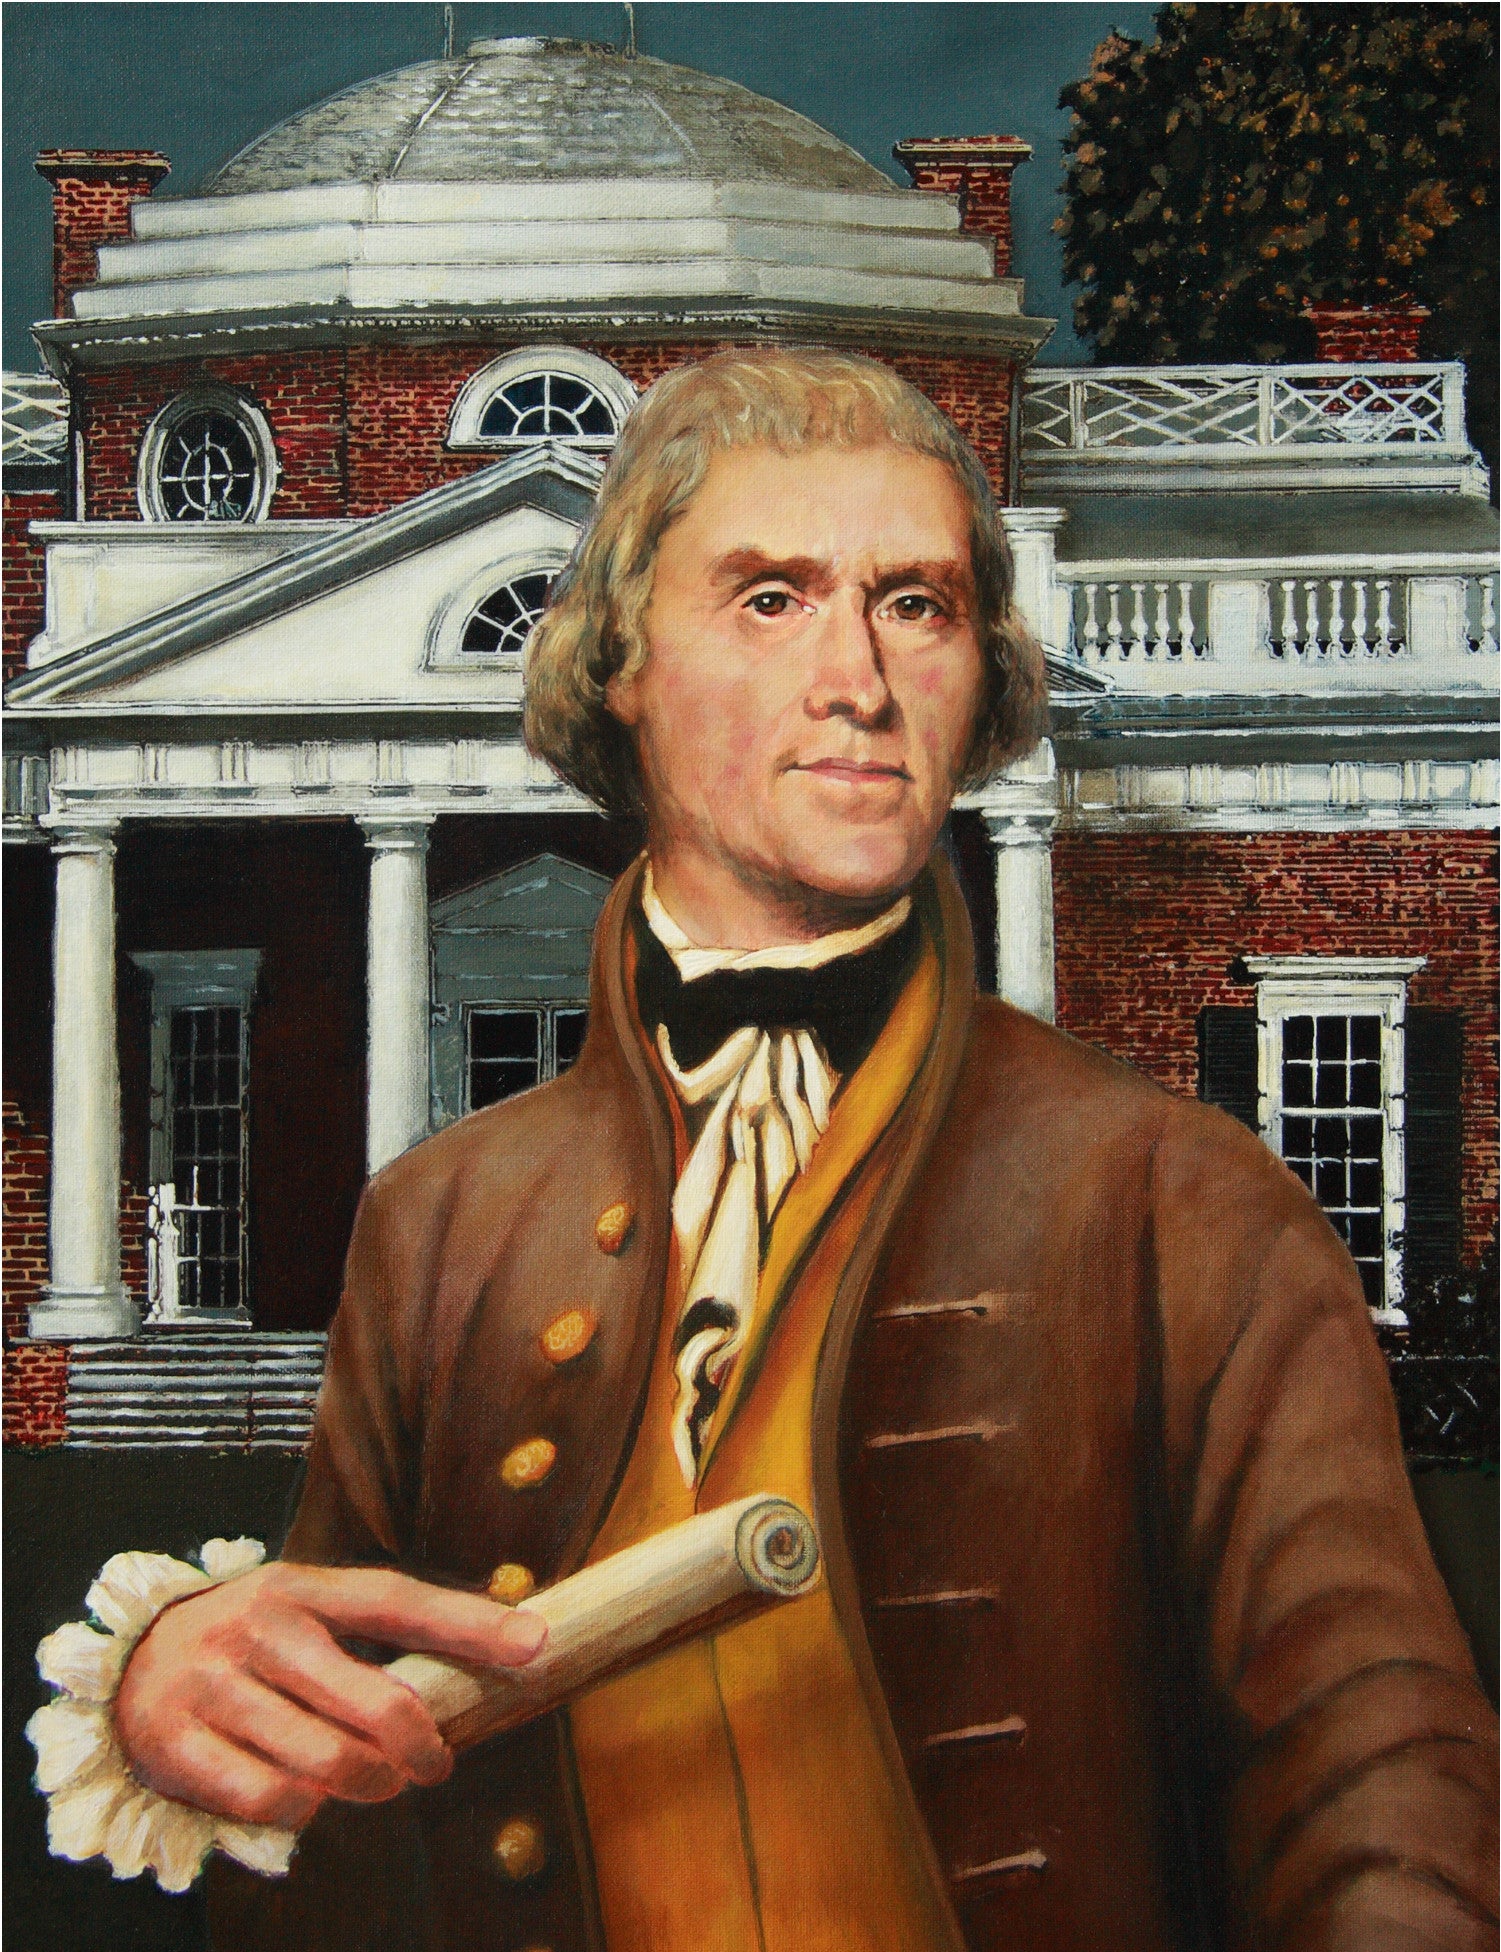 Thomas Jefferson in front of Monticello by artist Trevor Goring